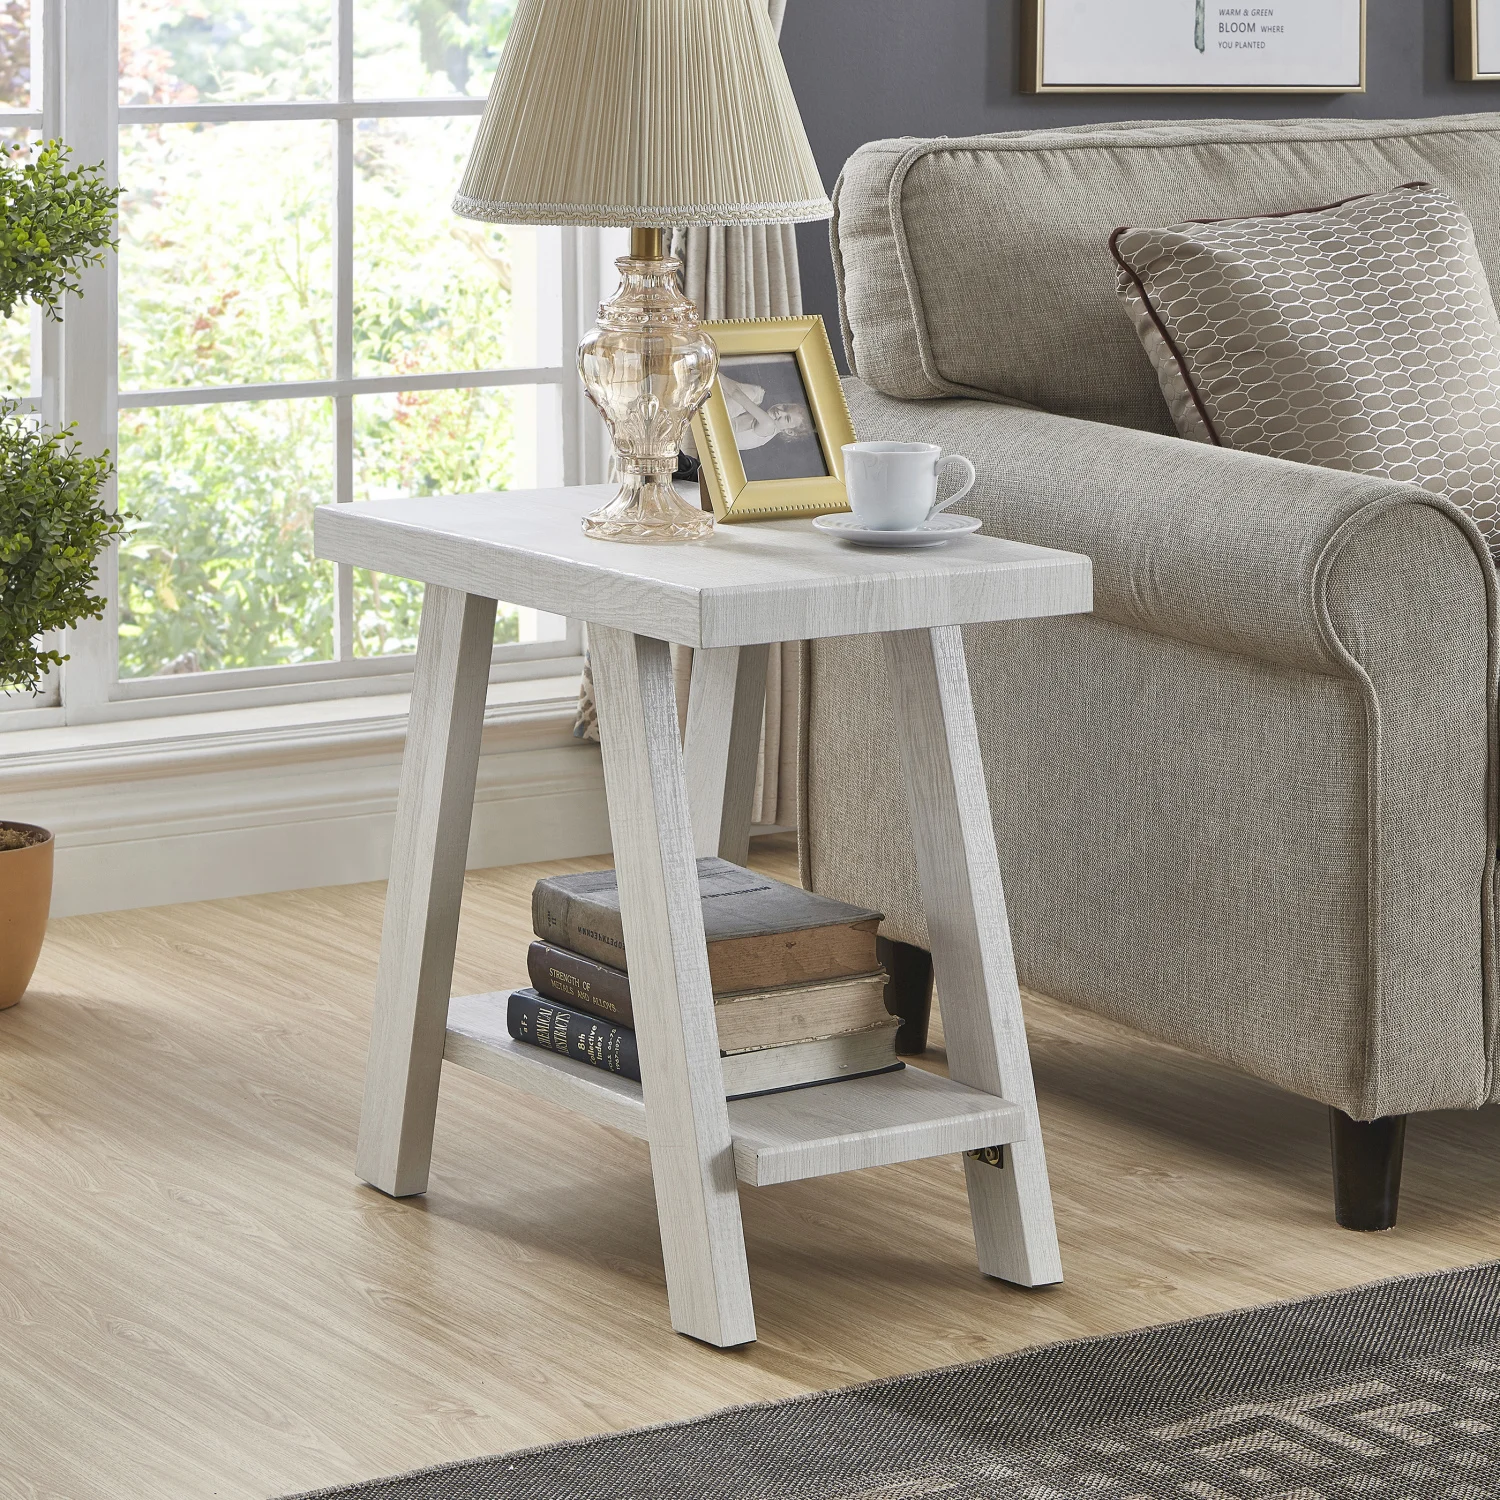 

Contemporary White Athens Finish Wood Side Table with Stylish Shelving Option for Modern Home Décor and Organization